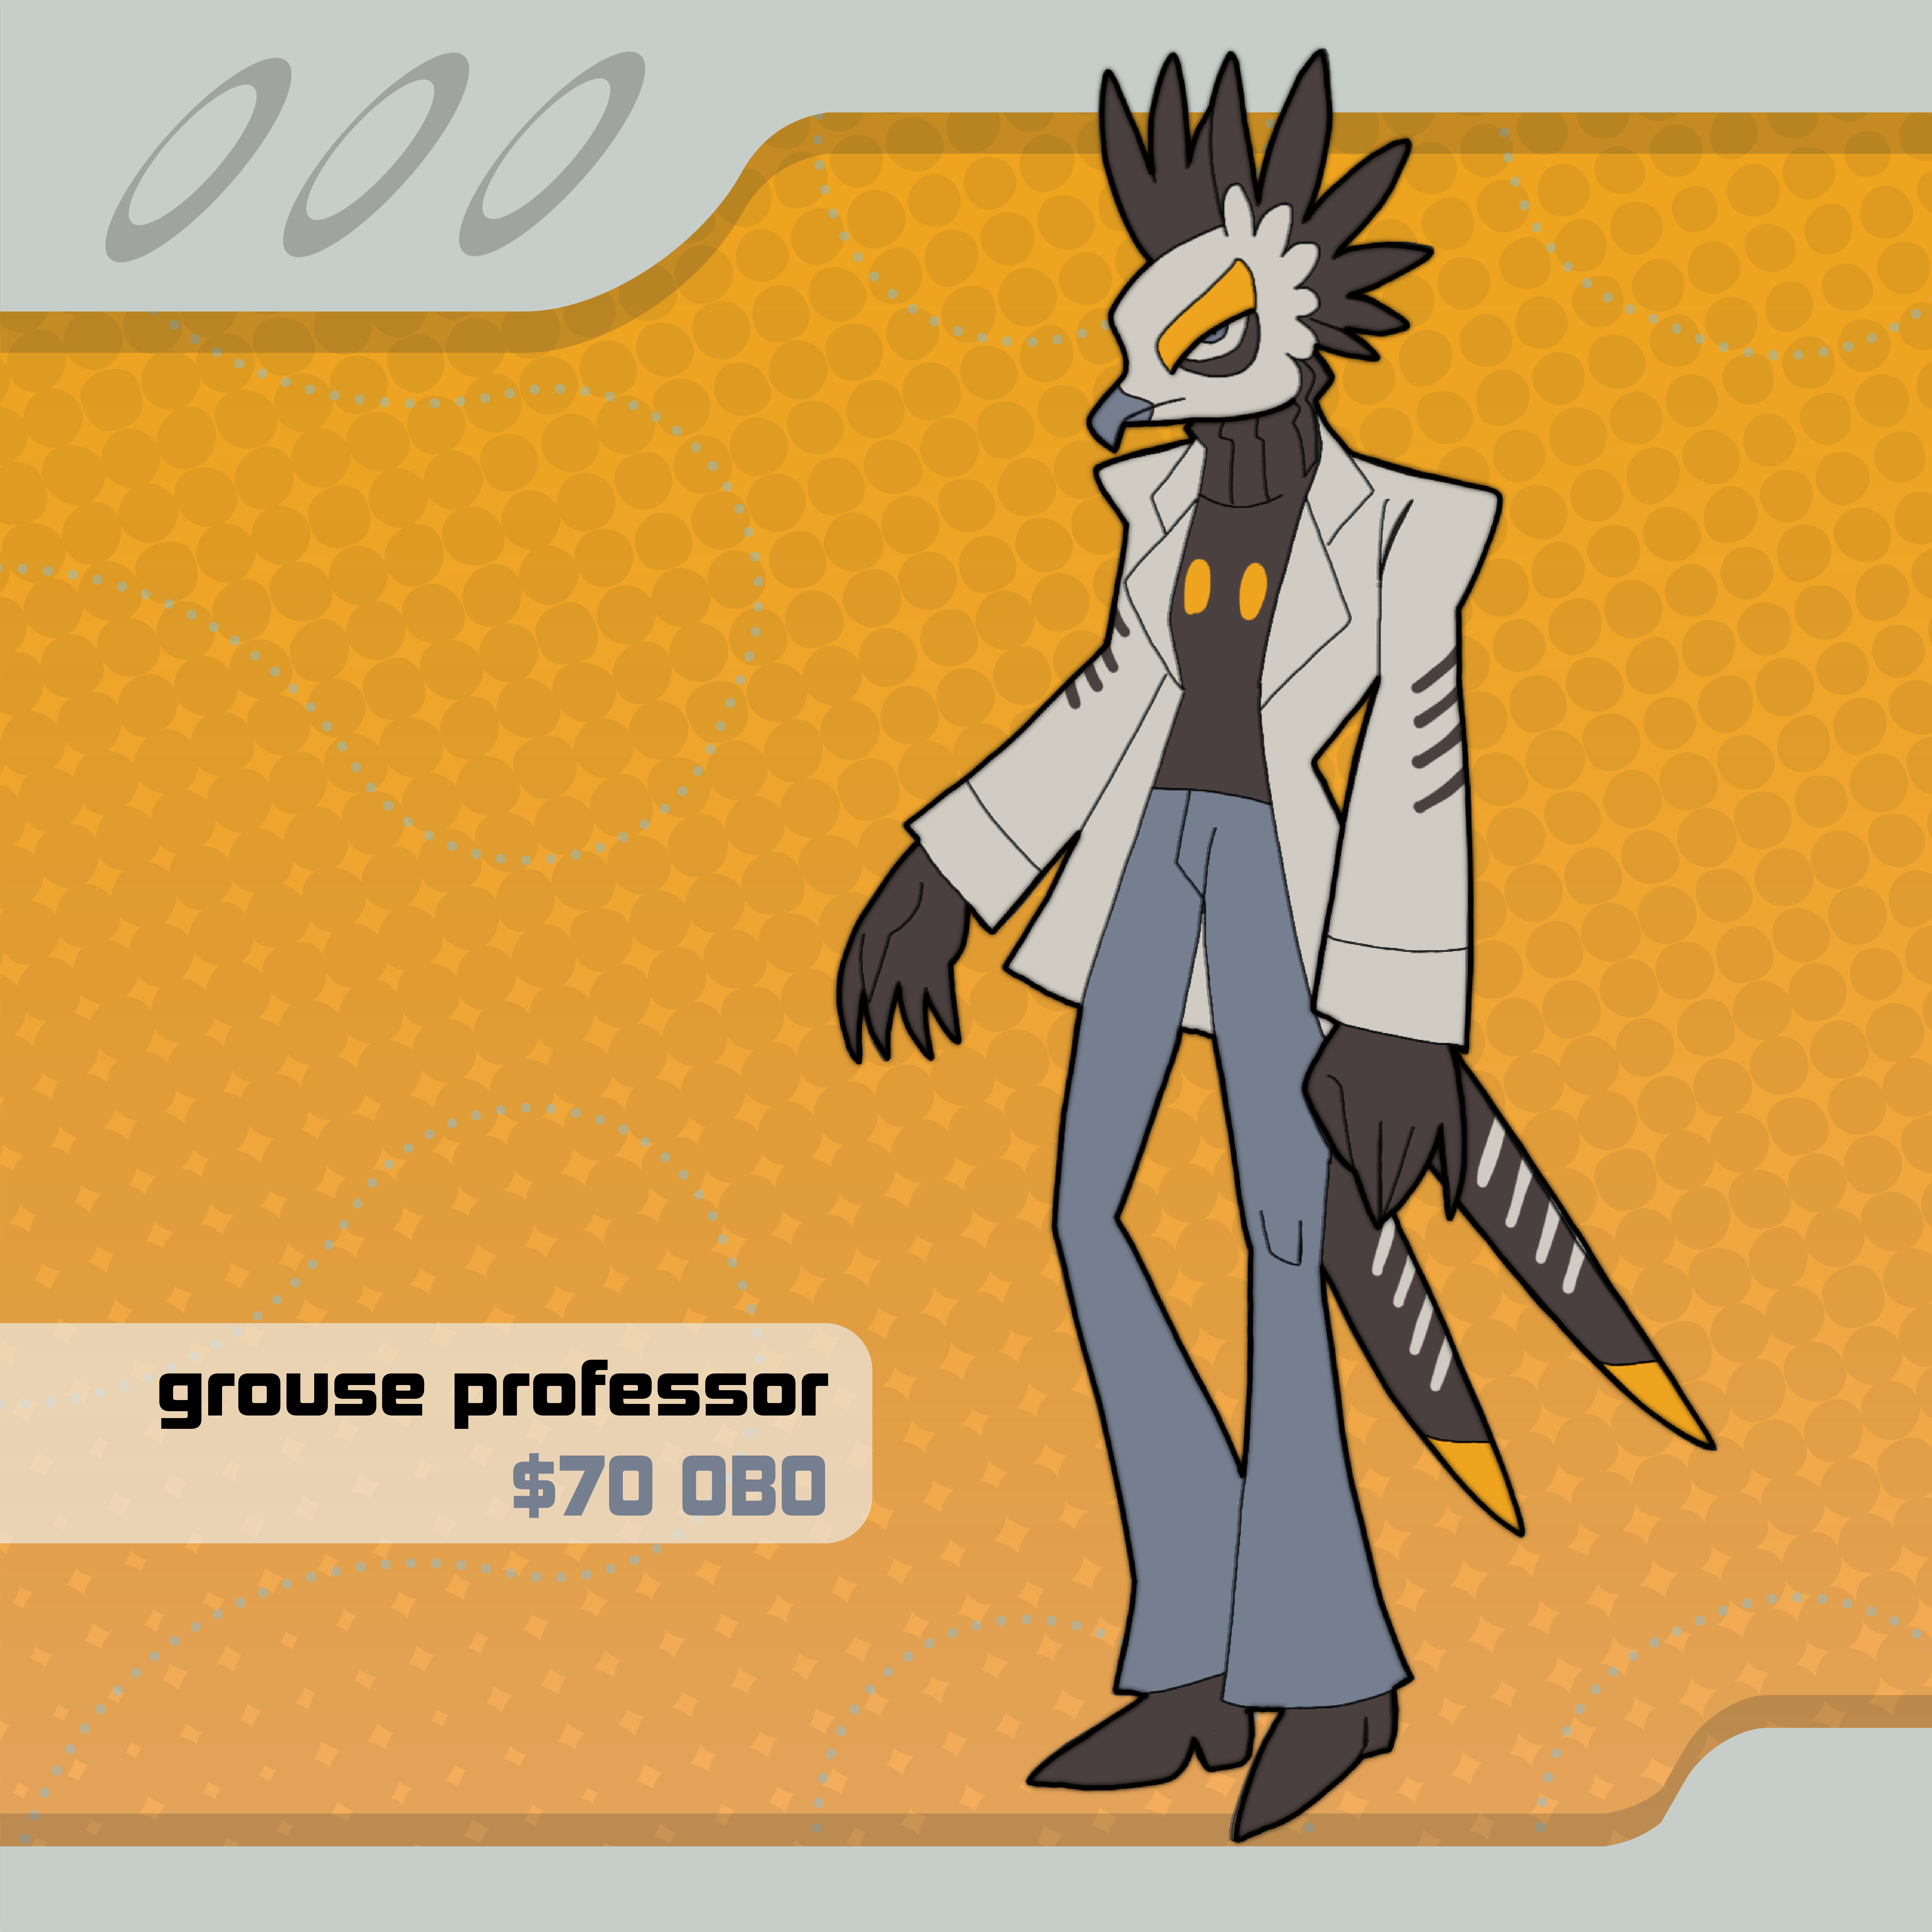 A character design based on a grouse prarie chicken that I made to sell.